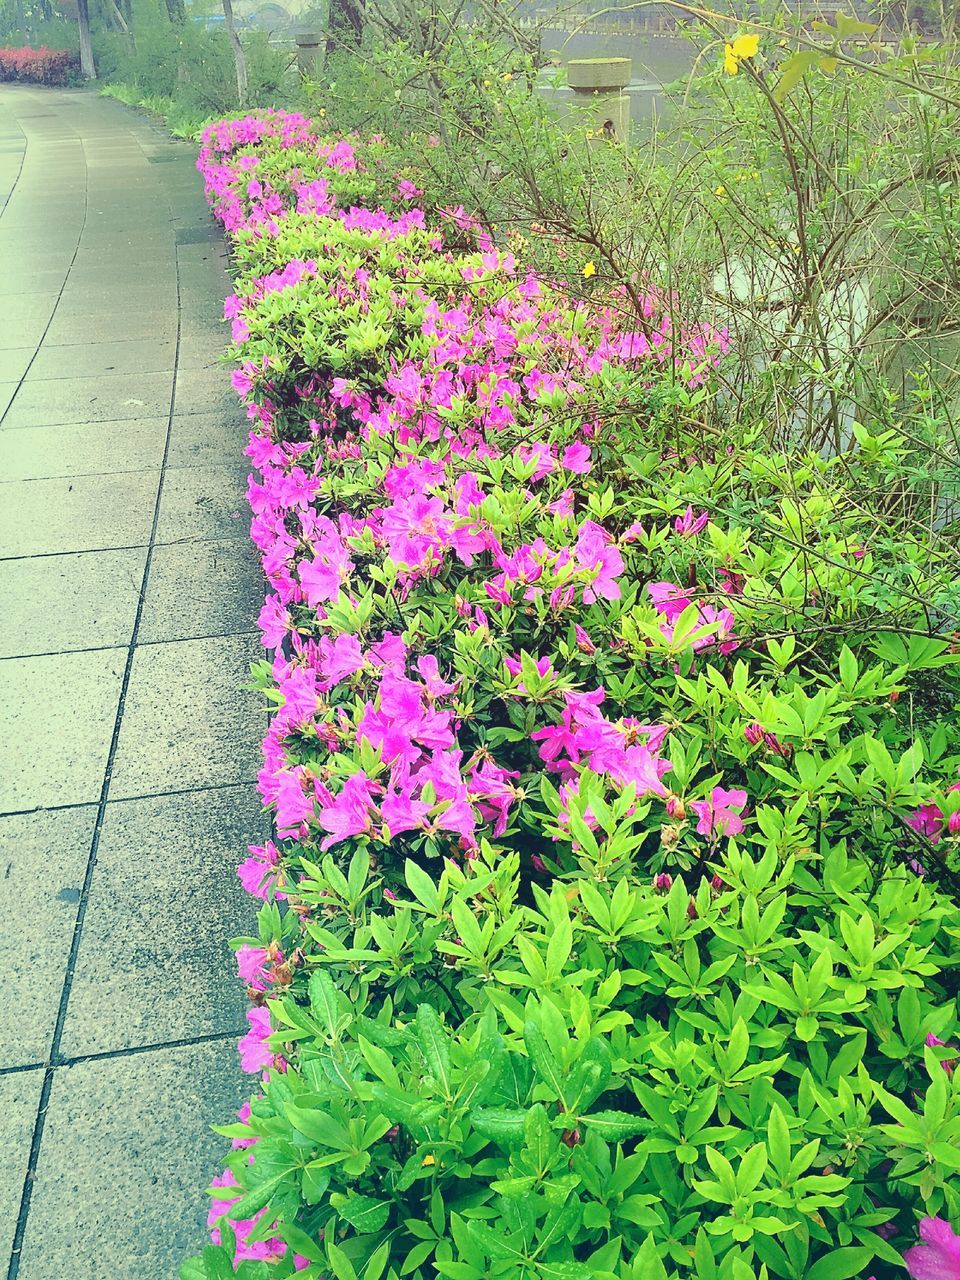 flower, growth, freshness, plant, beauty in nature, fragility, nature, high angle view, pink color, leaf, petal, park - man made space, blooming, footpath, day, outdoors, green color, in bloom, transportation, flowerbed